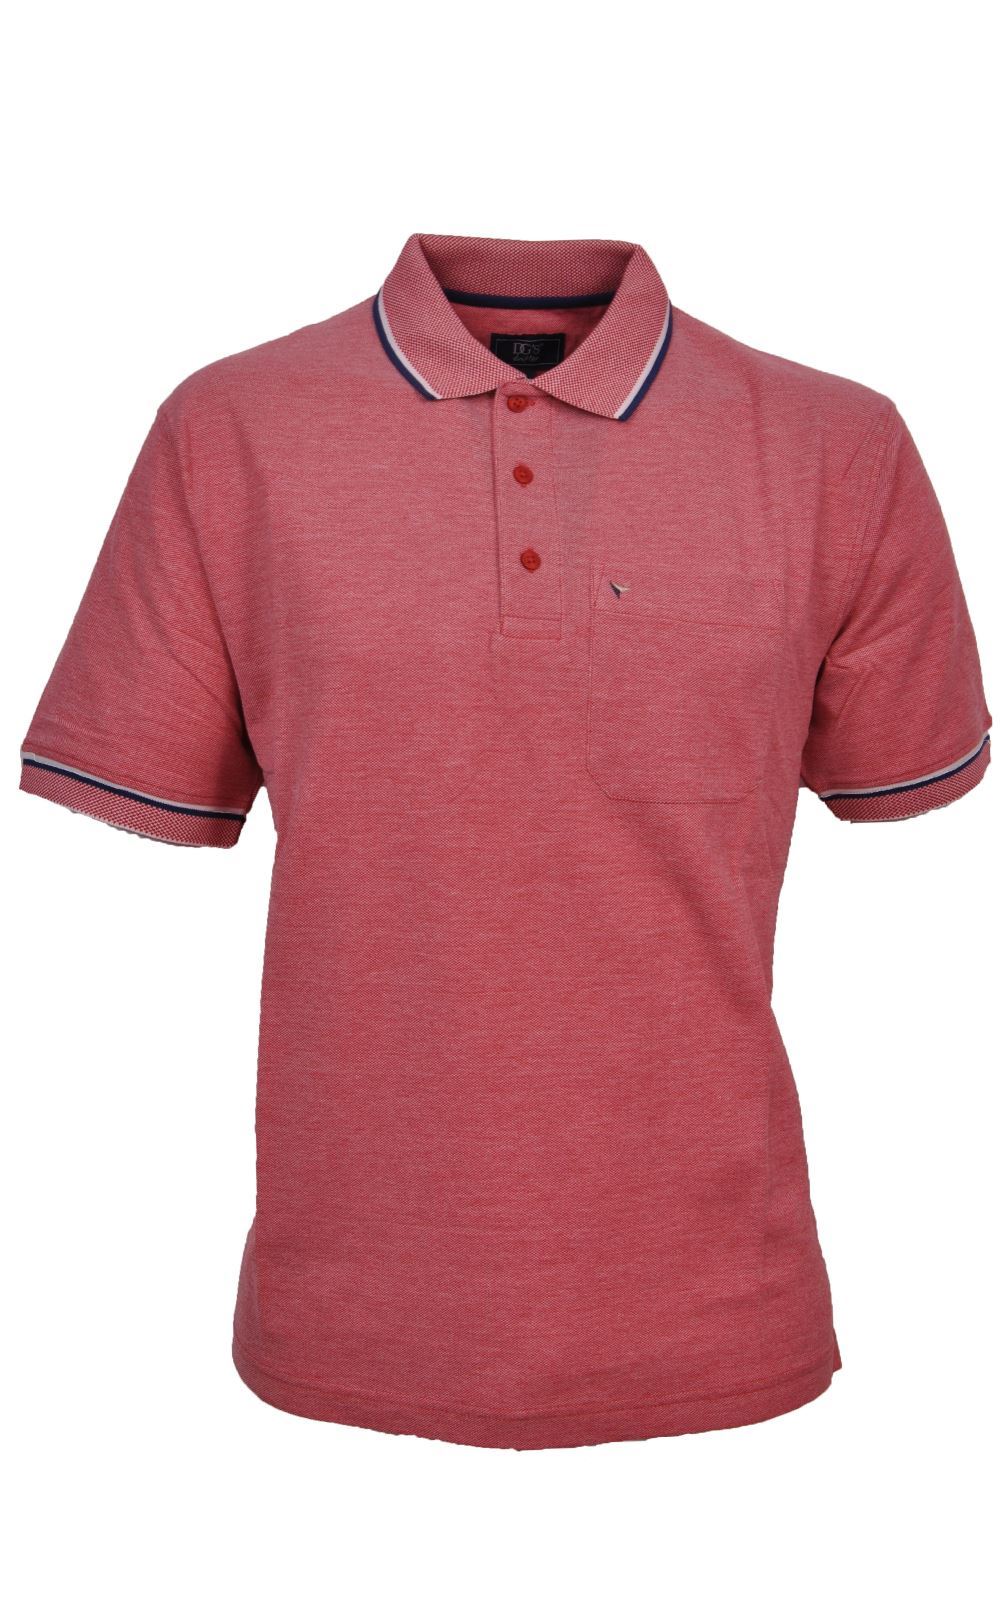 Picture of Daniel Grahame Polo Shirt Drifter 55104